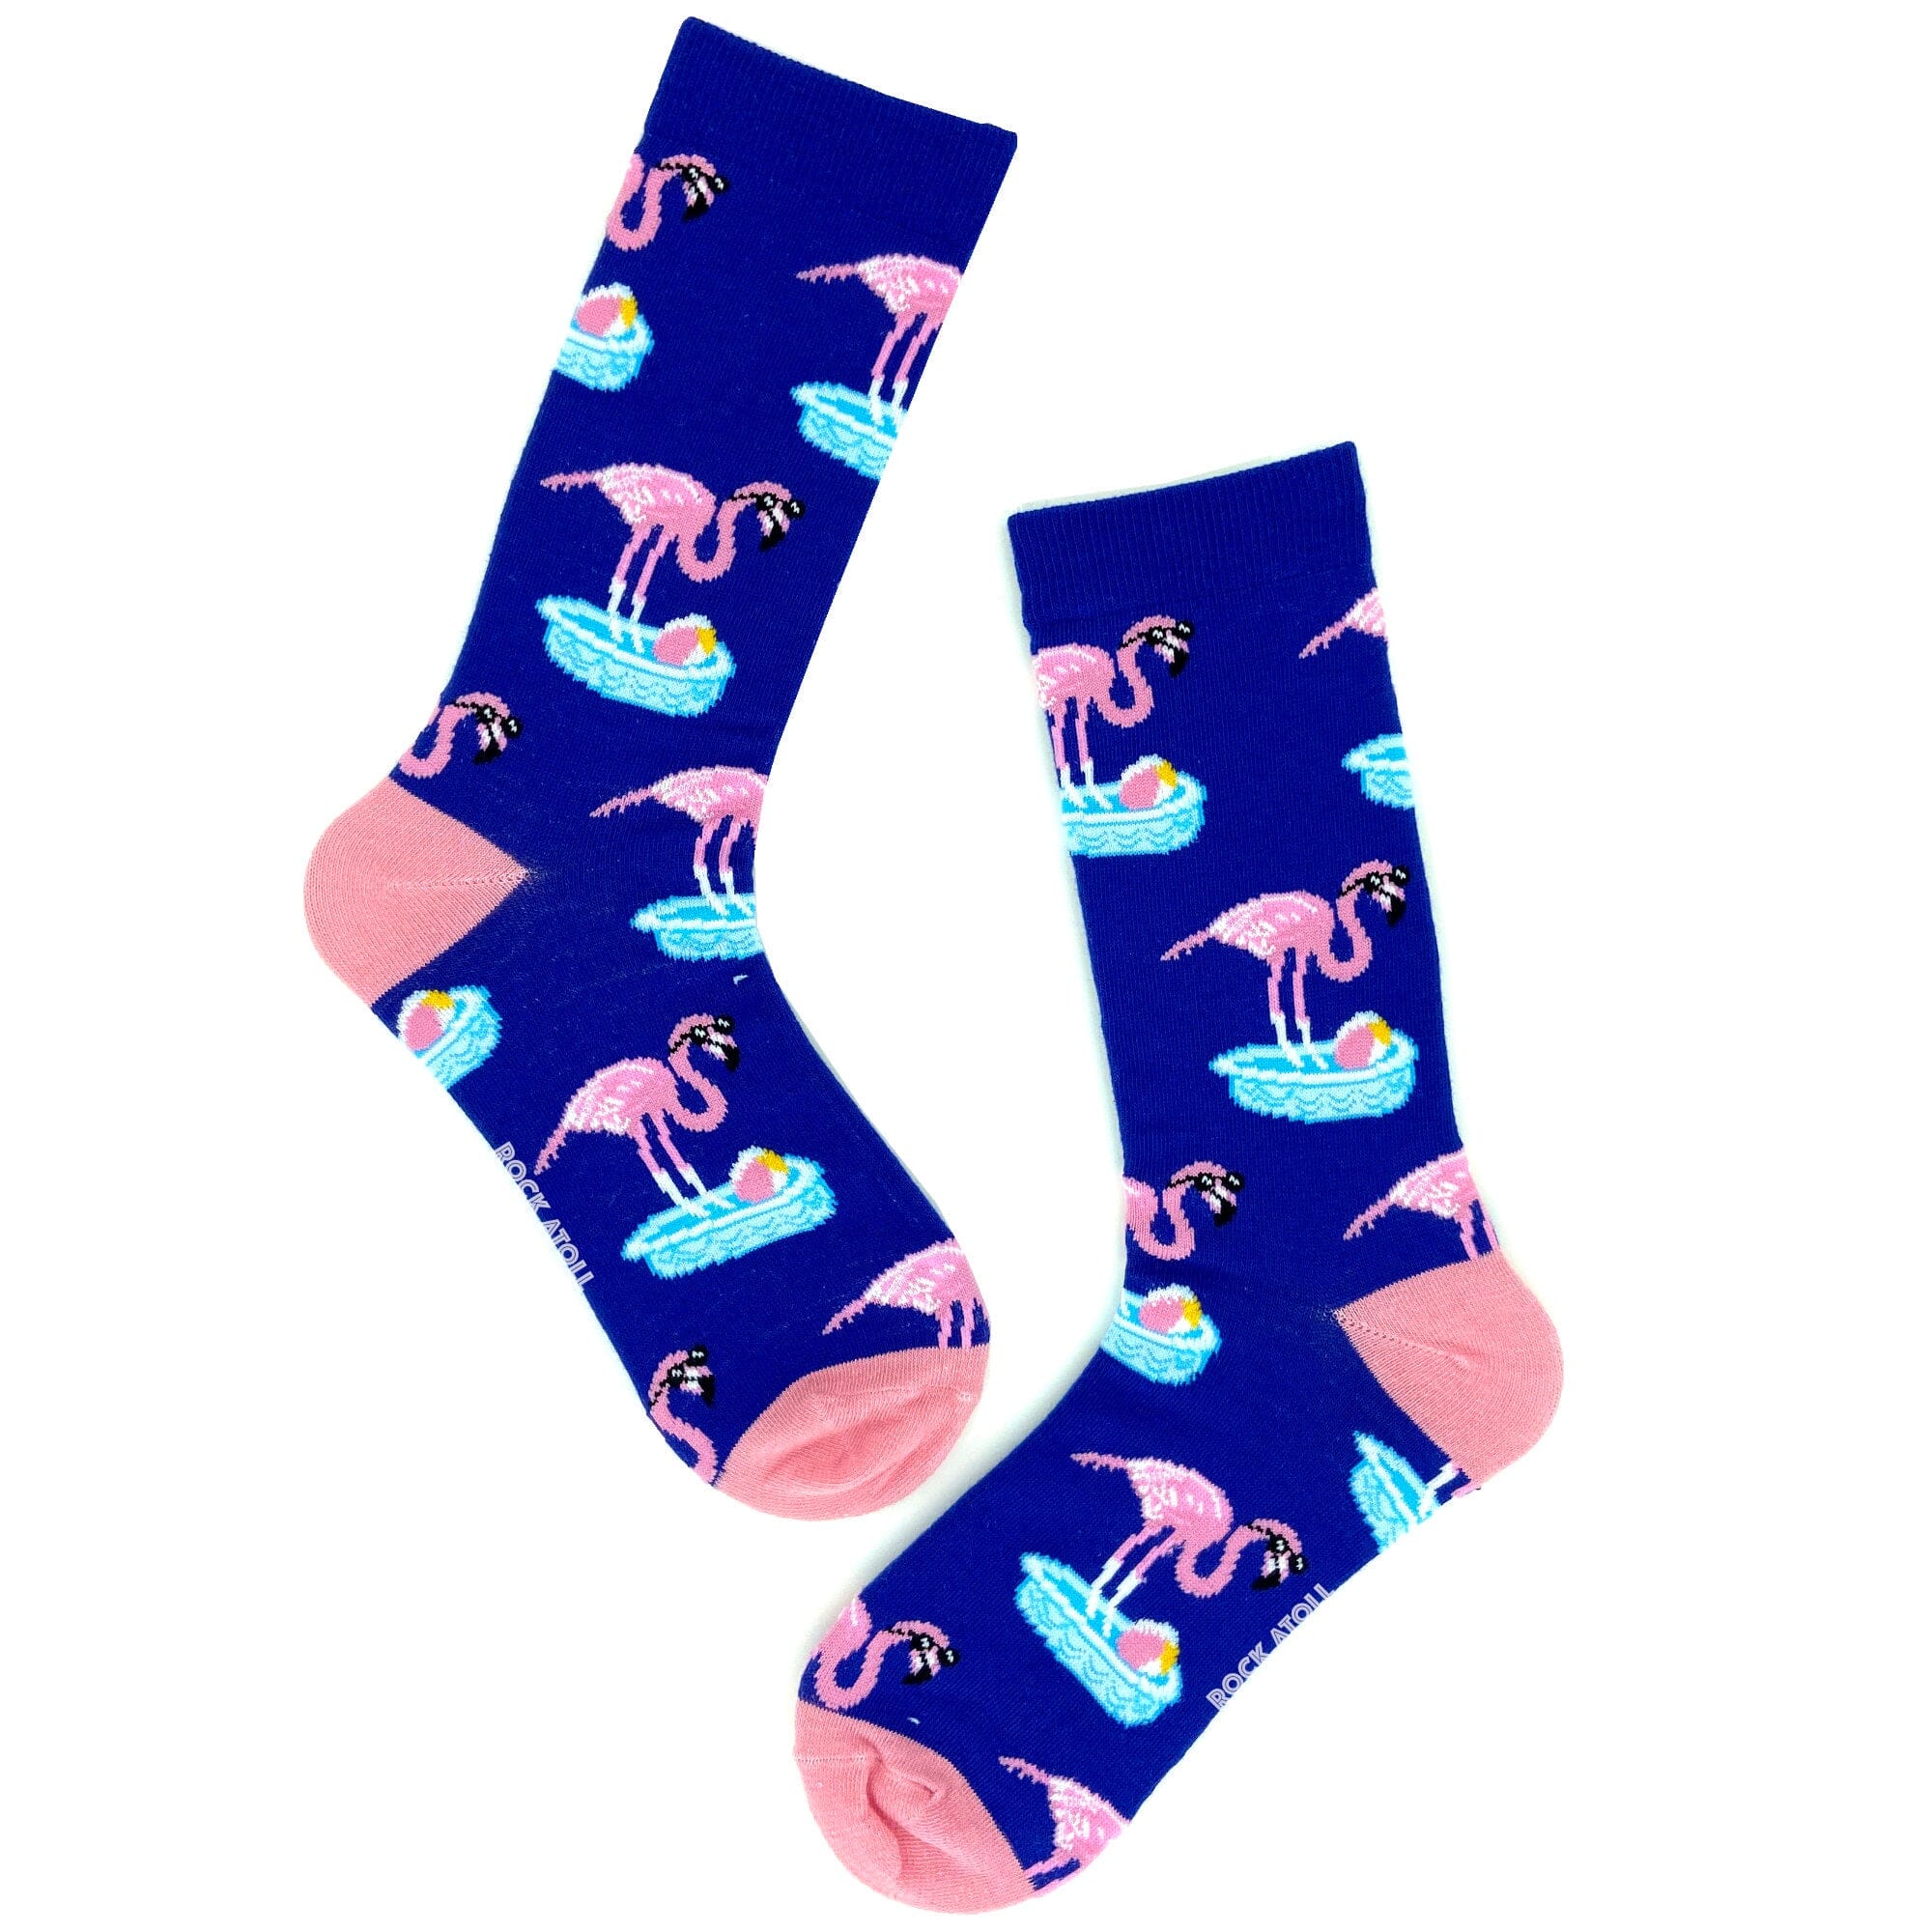 Fun Colorful Flamingo Patterned Novelty Socks for Men Women and Teens